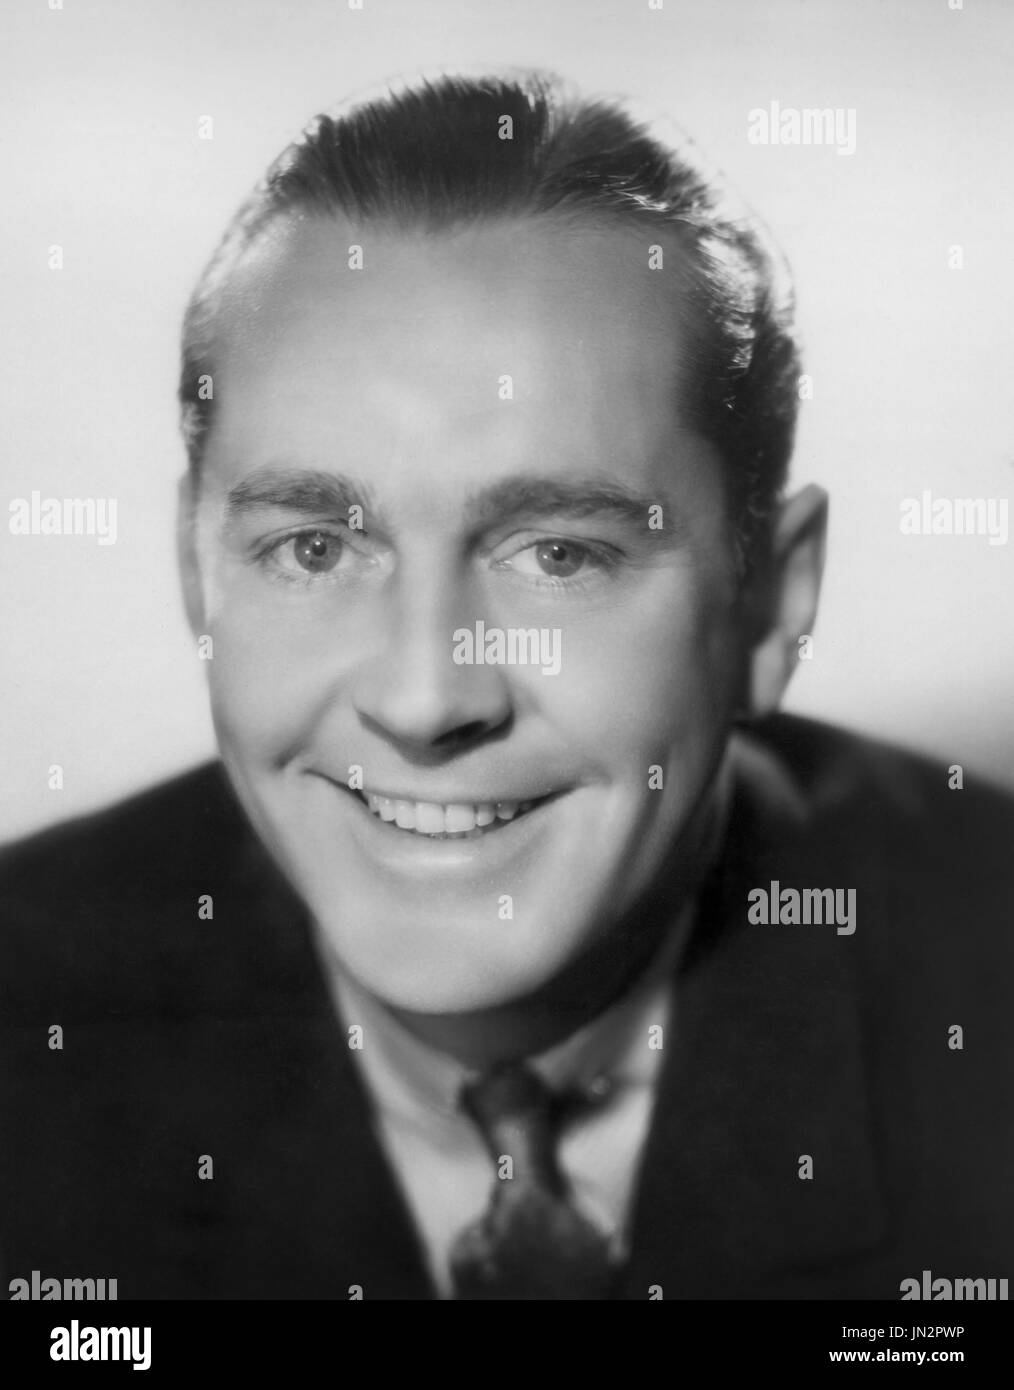 James dunn Black and White Stock Photos & Images - Alamy